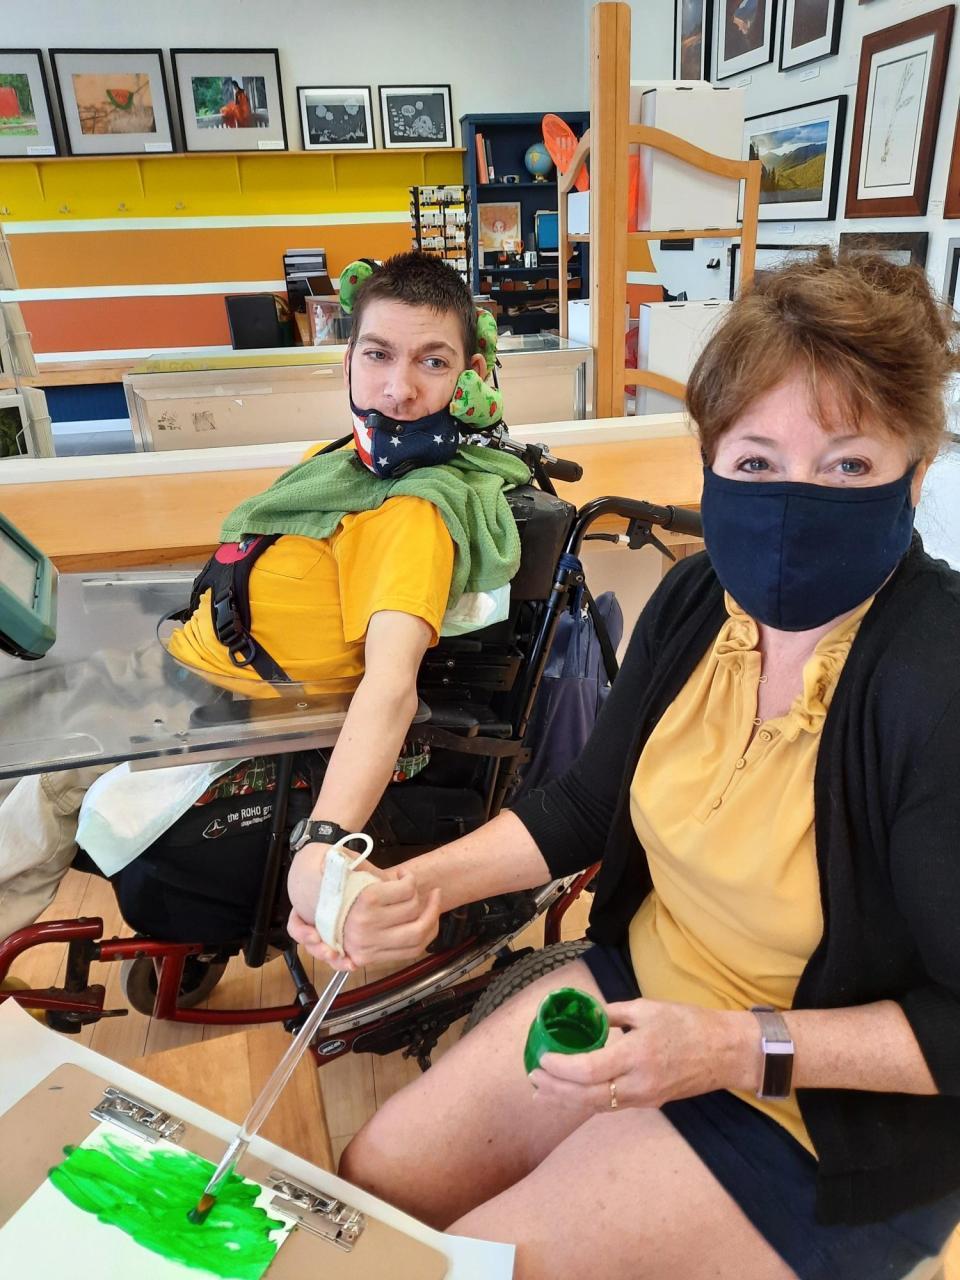 A man with a wheelchair and a woman paint together at ADK ArtRise studio in Saranac Lake